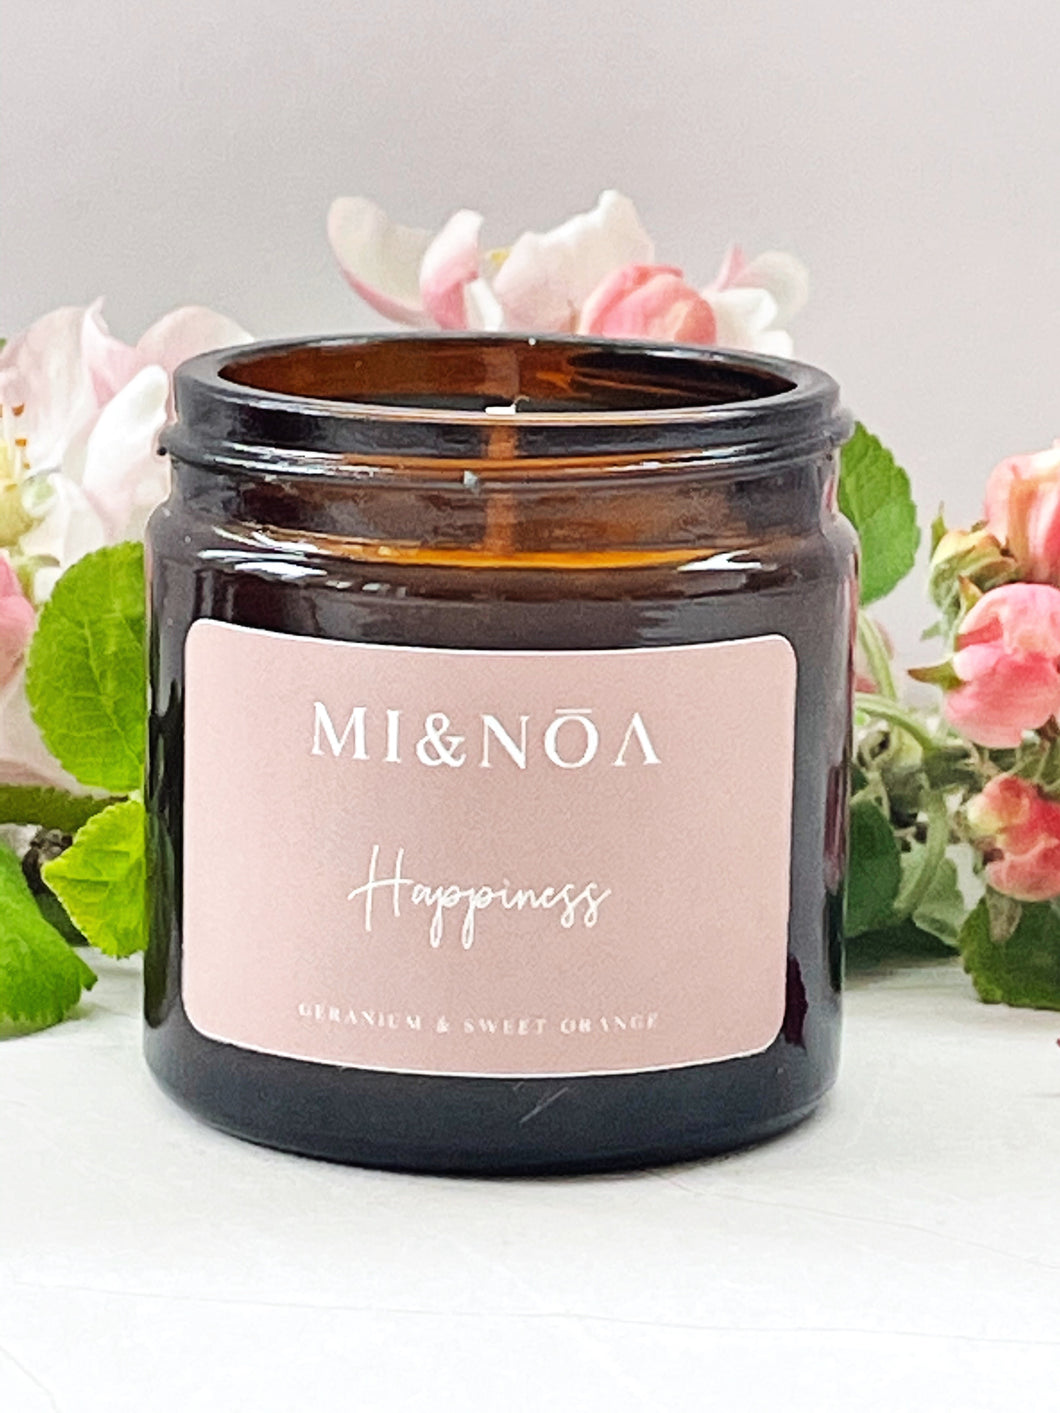 Happiness Soy Wax Essential Oil Candle